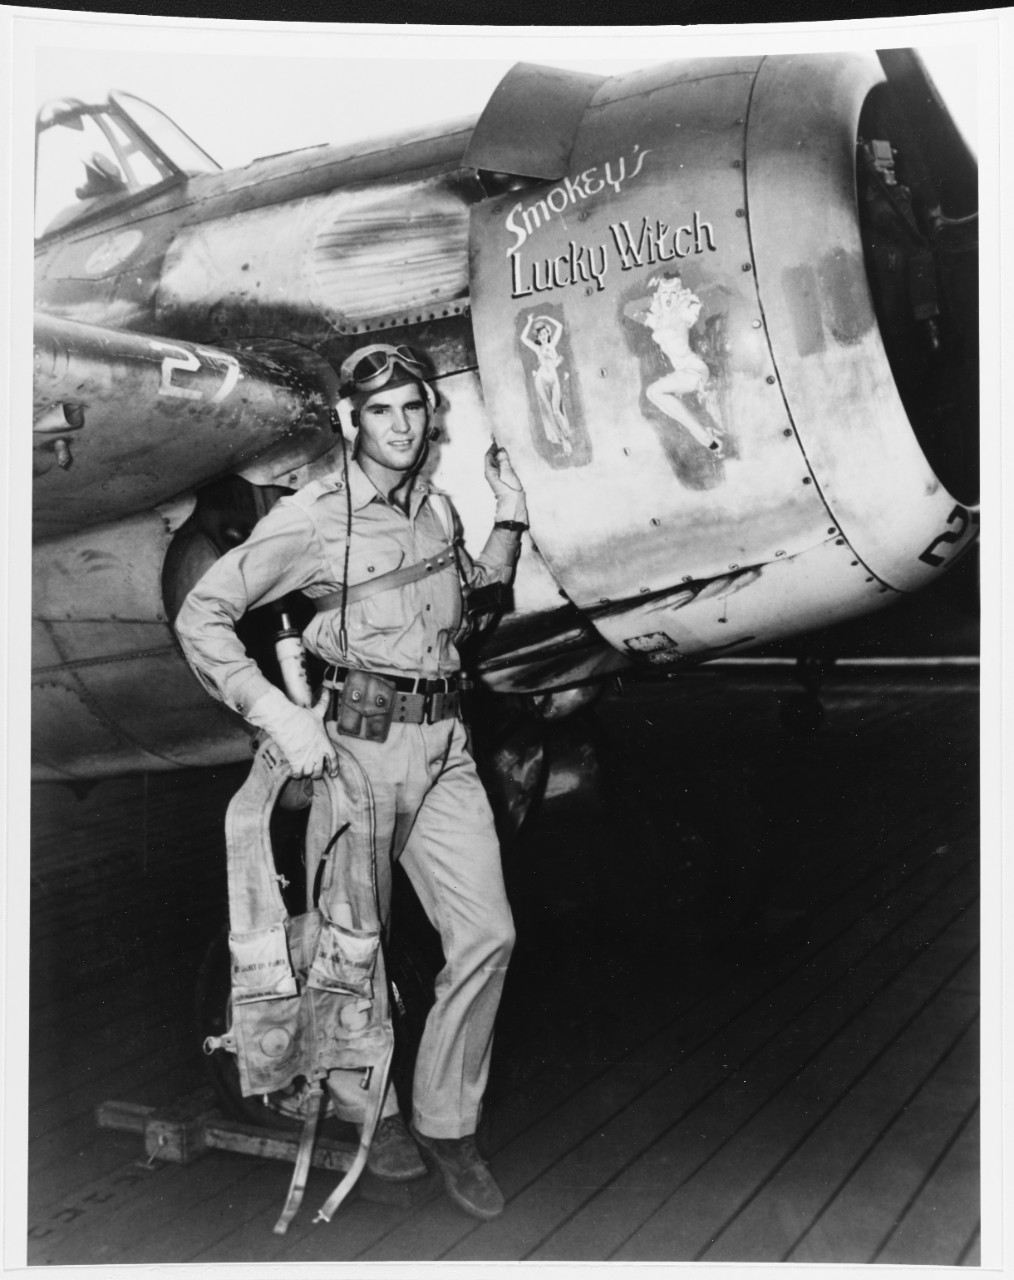 Ens. Darrell C. Bennett, USNR, stands beside “Smokey’s Lucky Witch”, his FM-2 Wildcat, on board Gambier Bay, 1 August 1944. Bennett strikes a jaunty pose carrying a Colt .45 cal. M1911A1 pistol in a shoulder holster as he leans on the fuselage and engine cowling, a VC-10 insignia painted below the cockpit windshield, and his Plane No. 27 on the starboard wing. (U.S. Navy Photograph 80-G-243864, National Archives and Records Administration, Still Pictures Division, College Park, Md.)